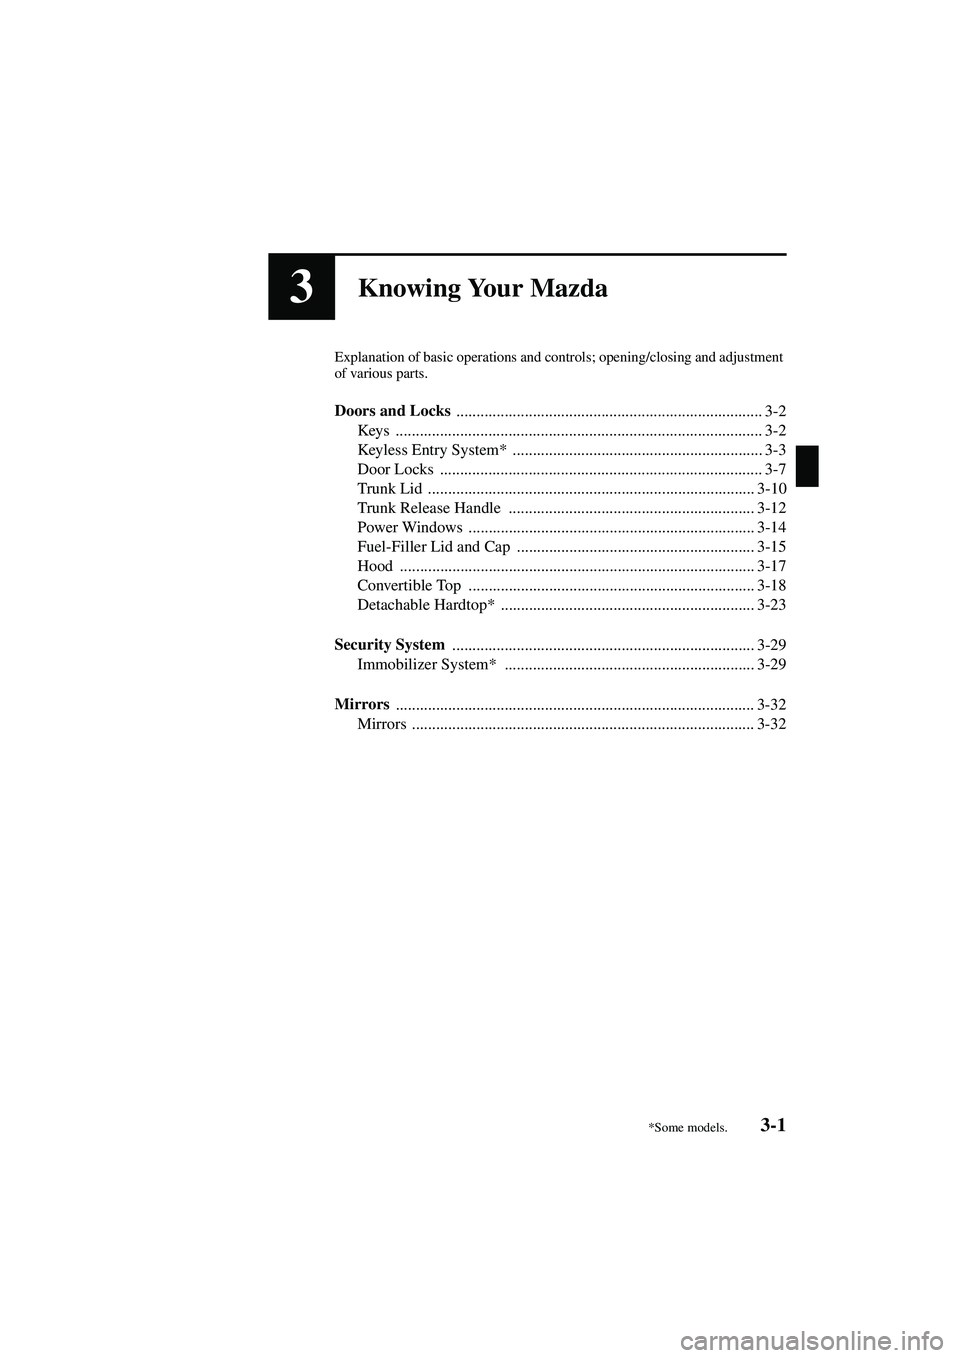 MAZDA MODEL MX-5 MIATA 2004  Owners Manual 3-1
Form No. 8S15-EA-03G
3Knowing Your Mazda
Explanation of basic operations and controls; opening/closing and adjustment 
of various parts.
Doors and Locks ...........................................